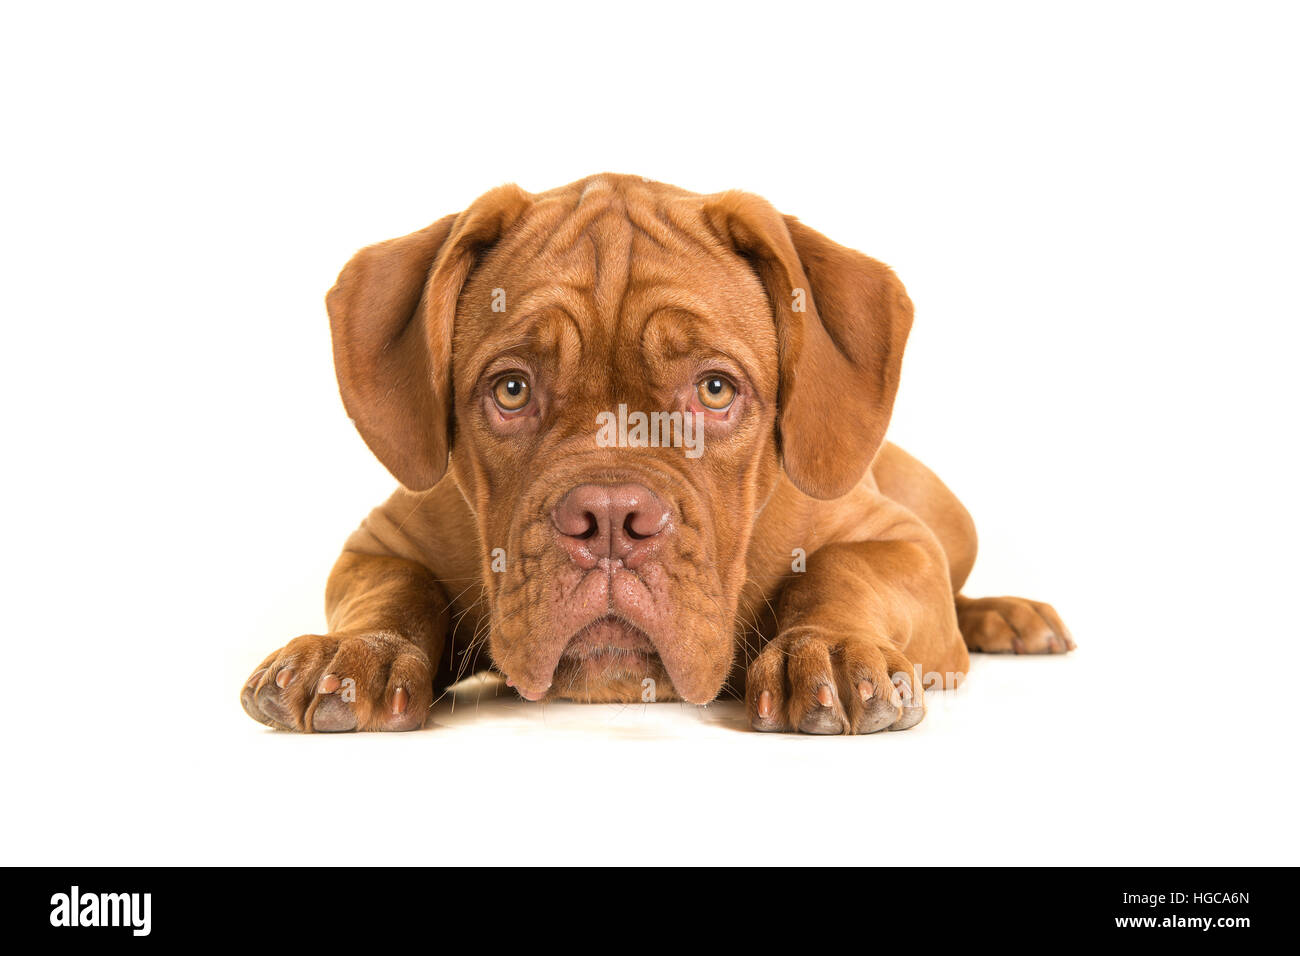 Young bordeaux dog lying on the floor looking up and facing the camera isolated on a white background seen from the front with its head on the floor Stock Photo